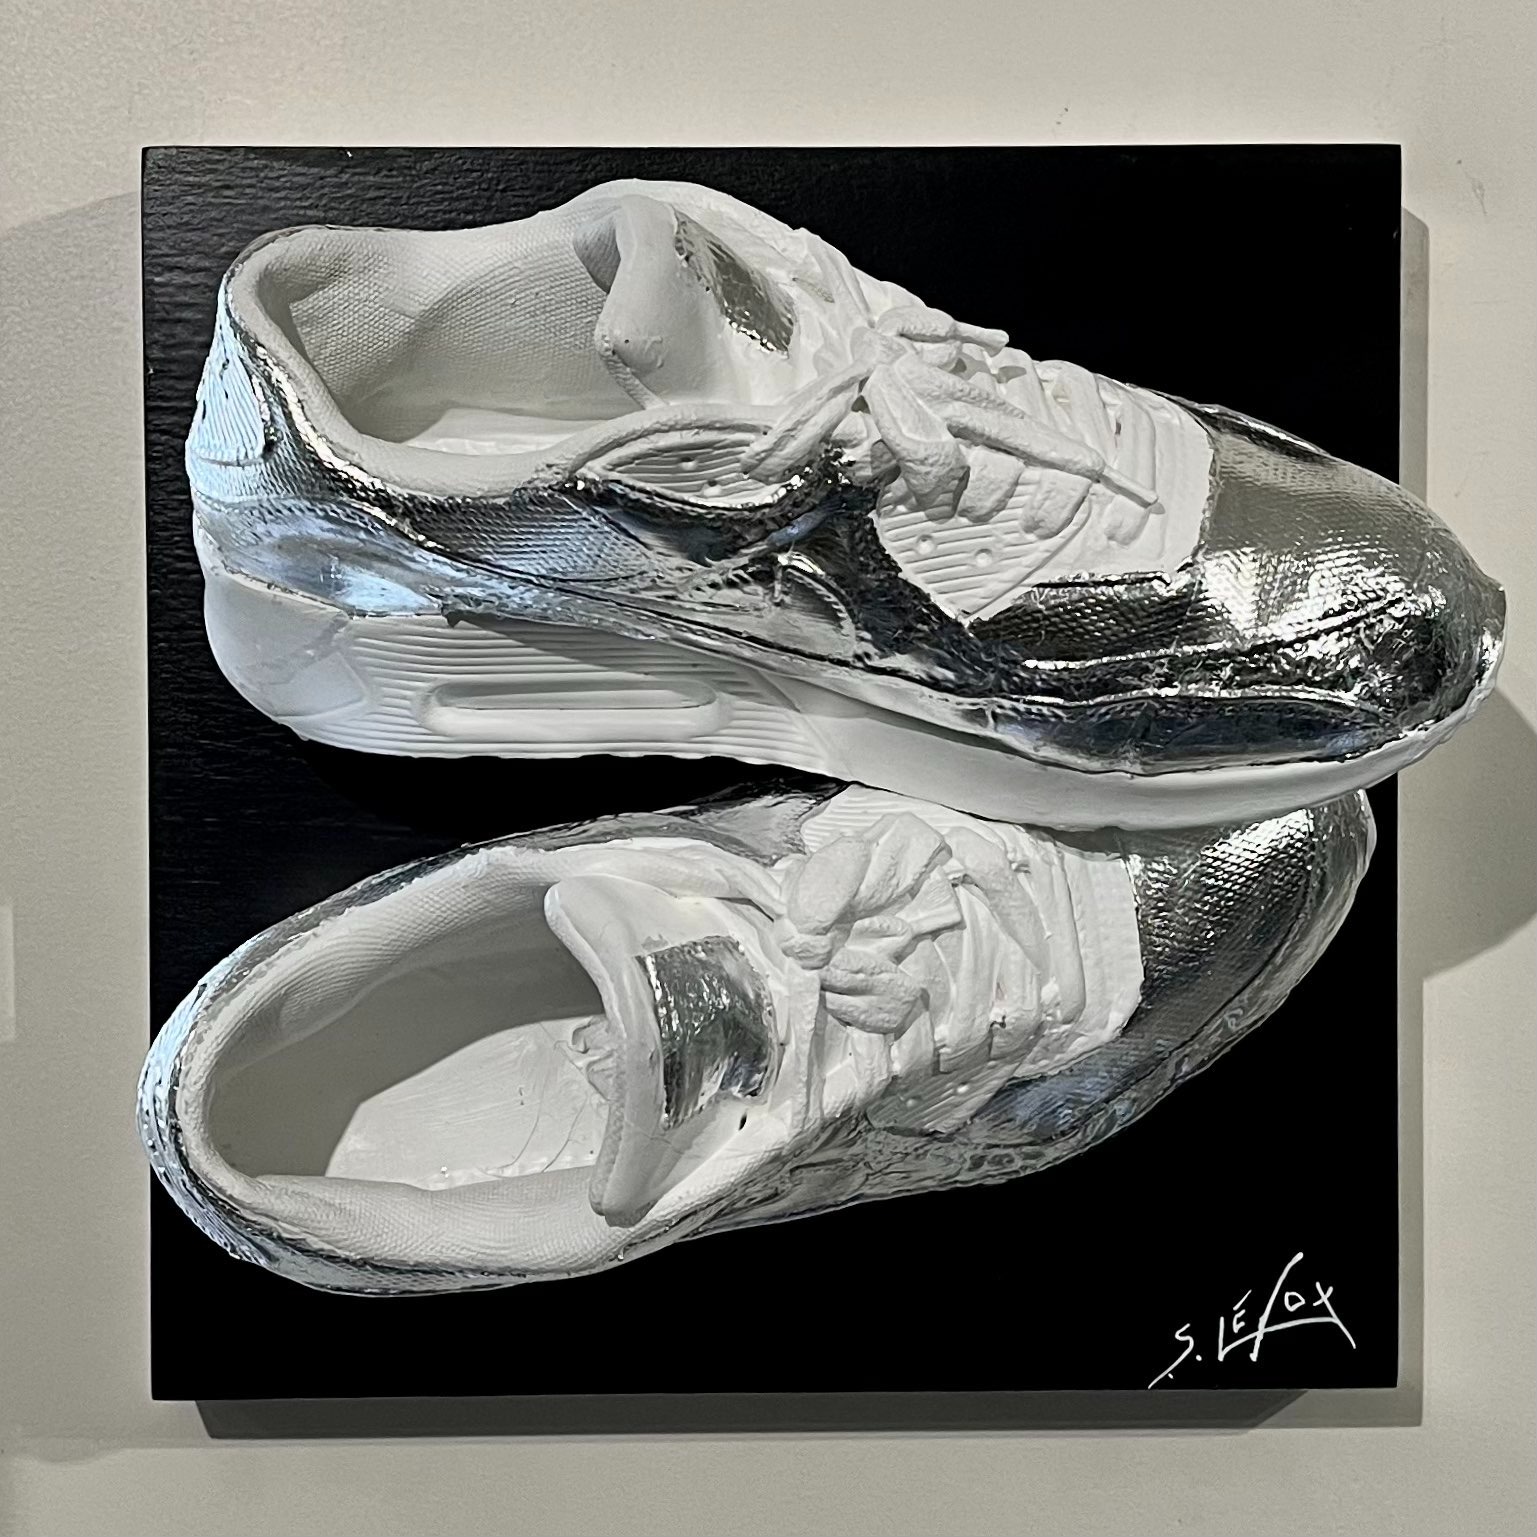 SILVER 90'</br>Acrylic and silver leaf on Nike Air Max 90, wooden box 30 X 30 X 20 SBD